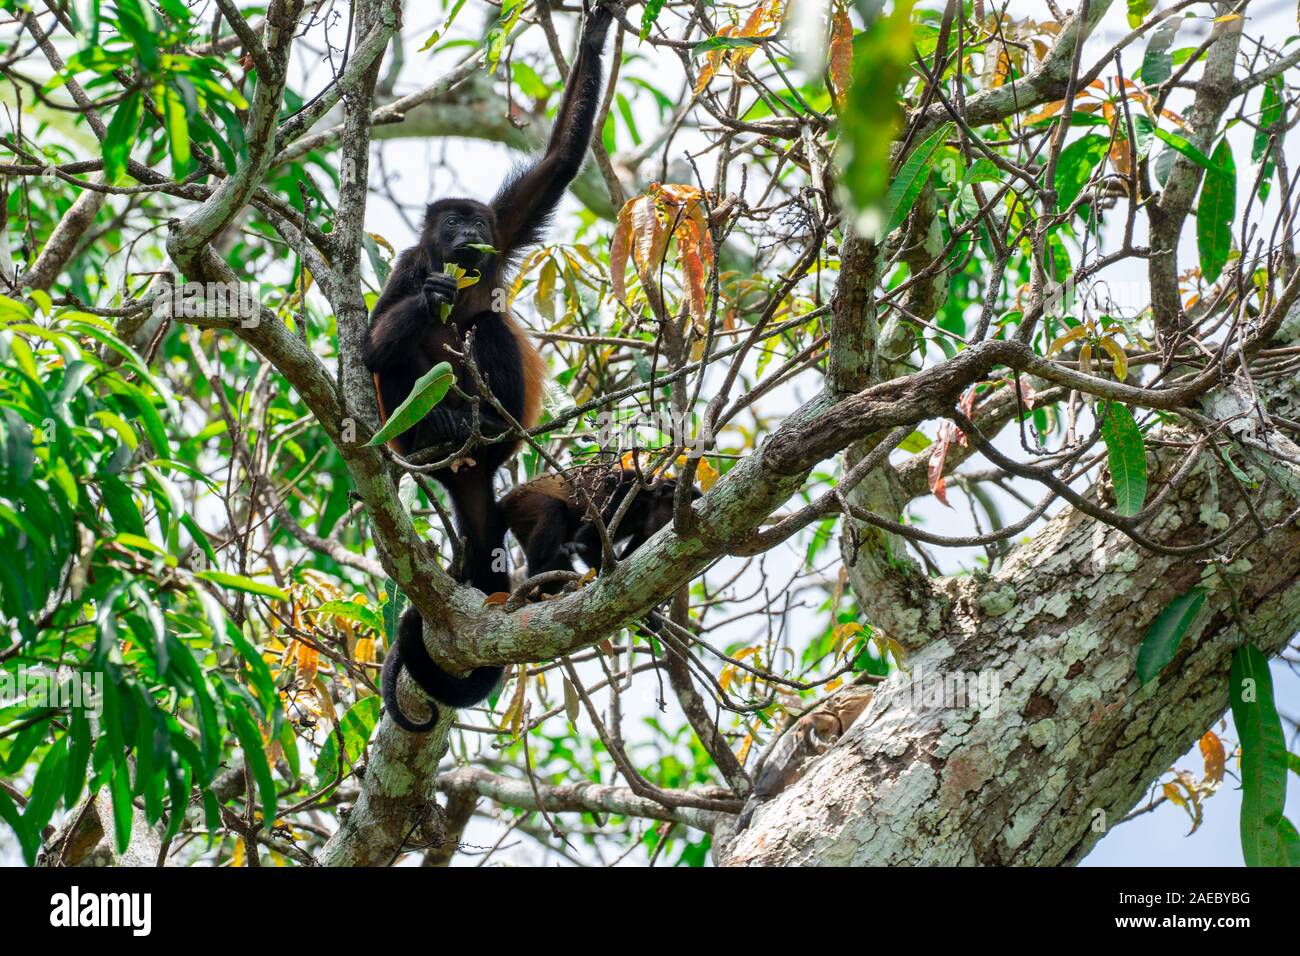 Mantled howler monkey. Wild mantled howler monkey (Alouatta palliata palliata) swinging from a branch in the Costa Rican rainforest. Stock Photo